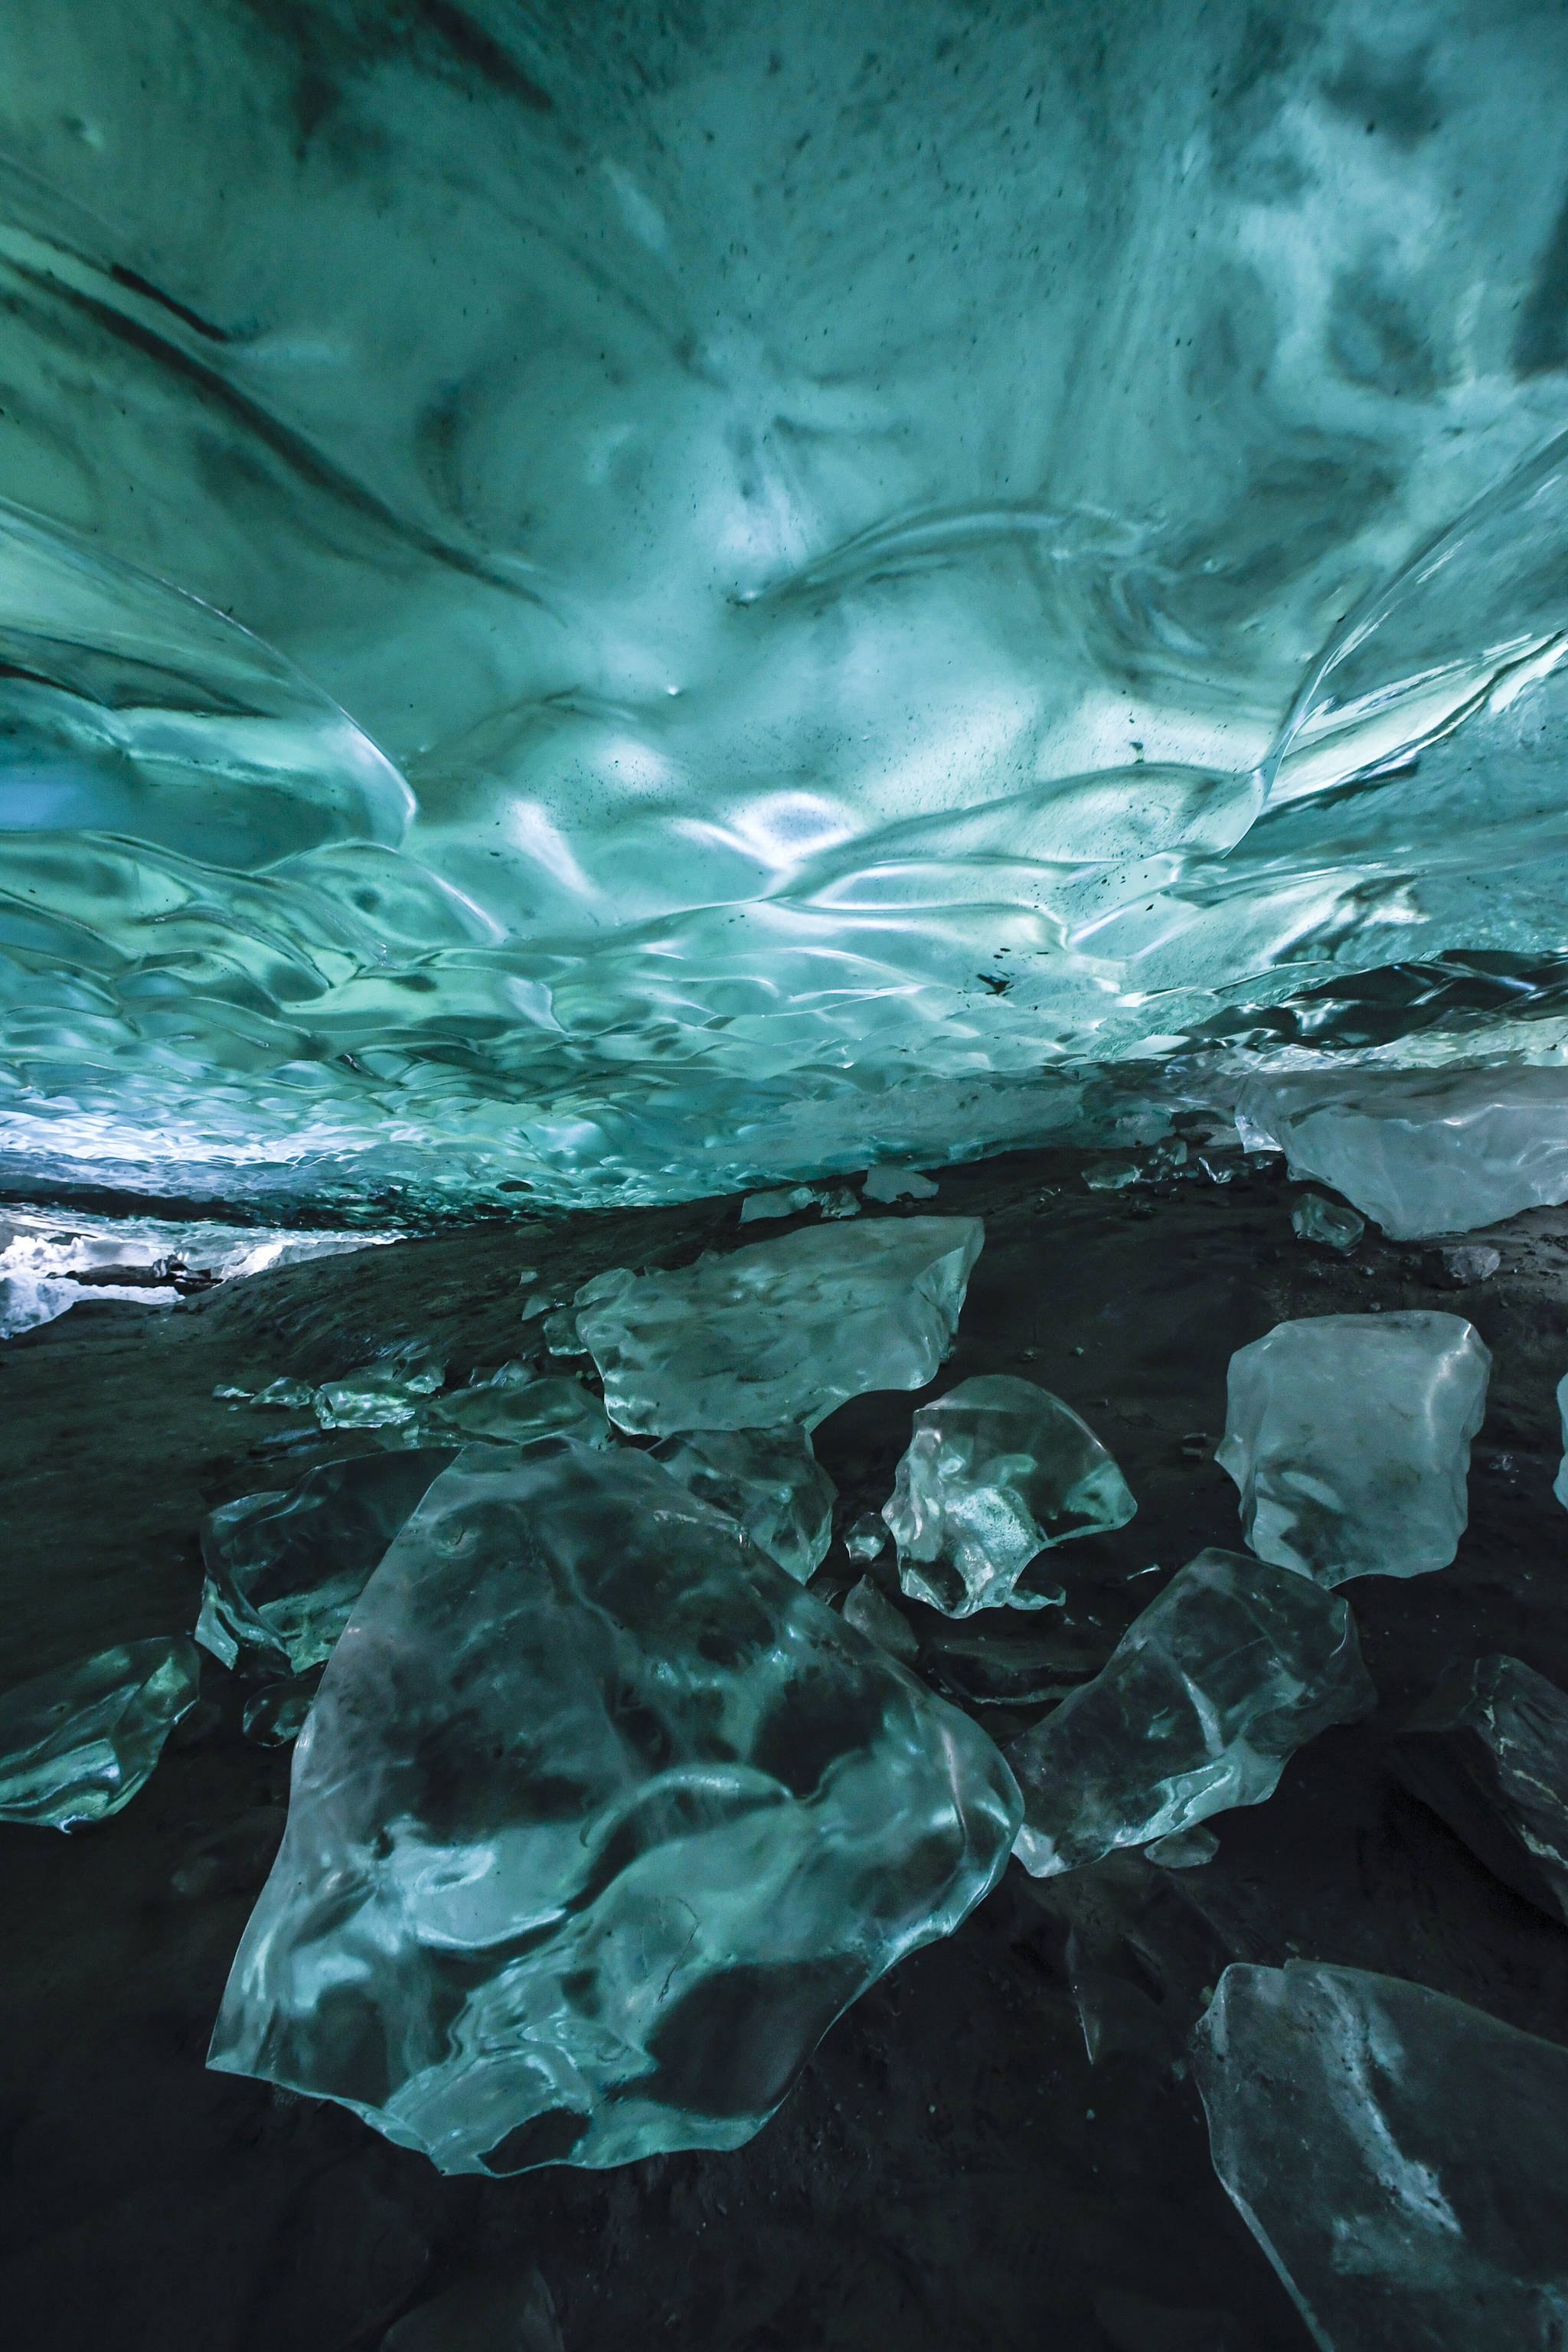 Interior views of an ice cave at the Mendenhall Glacier on Monday, Feb. 11, 2019. (Michael Penn | Juneau Empire)